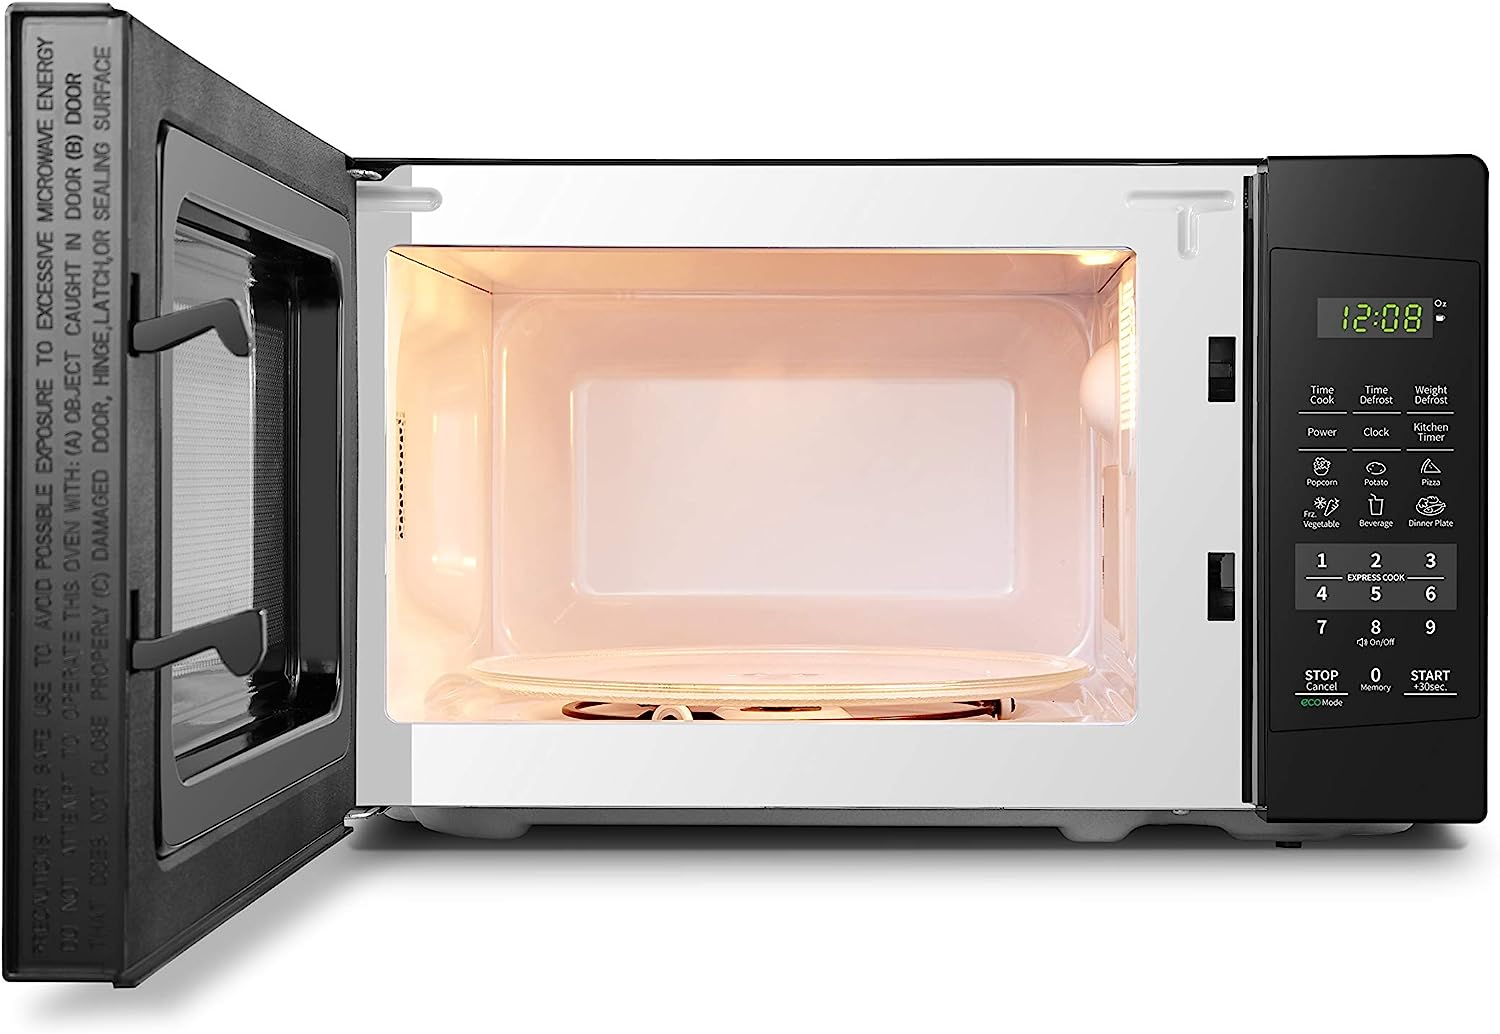 COMFEE' EM720CPL-PMB Countertop Microwave Oven with Sound On/Off